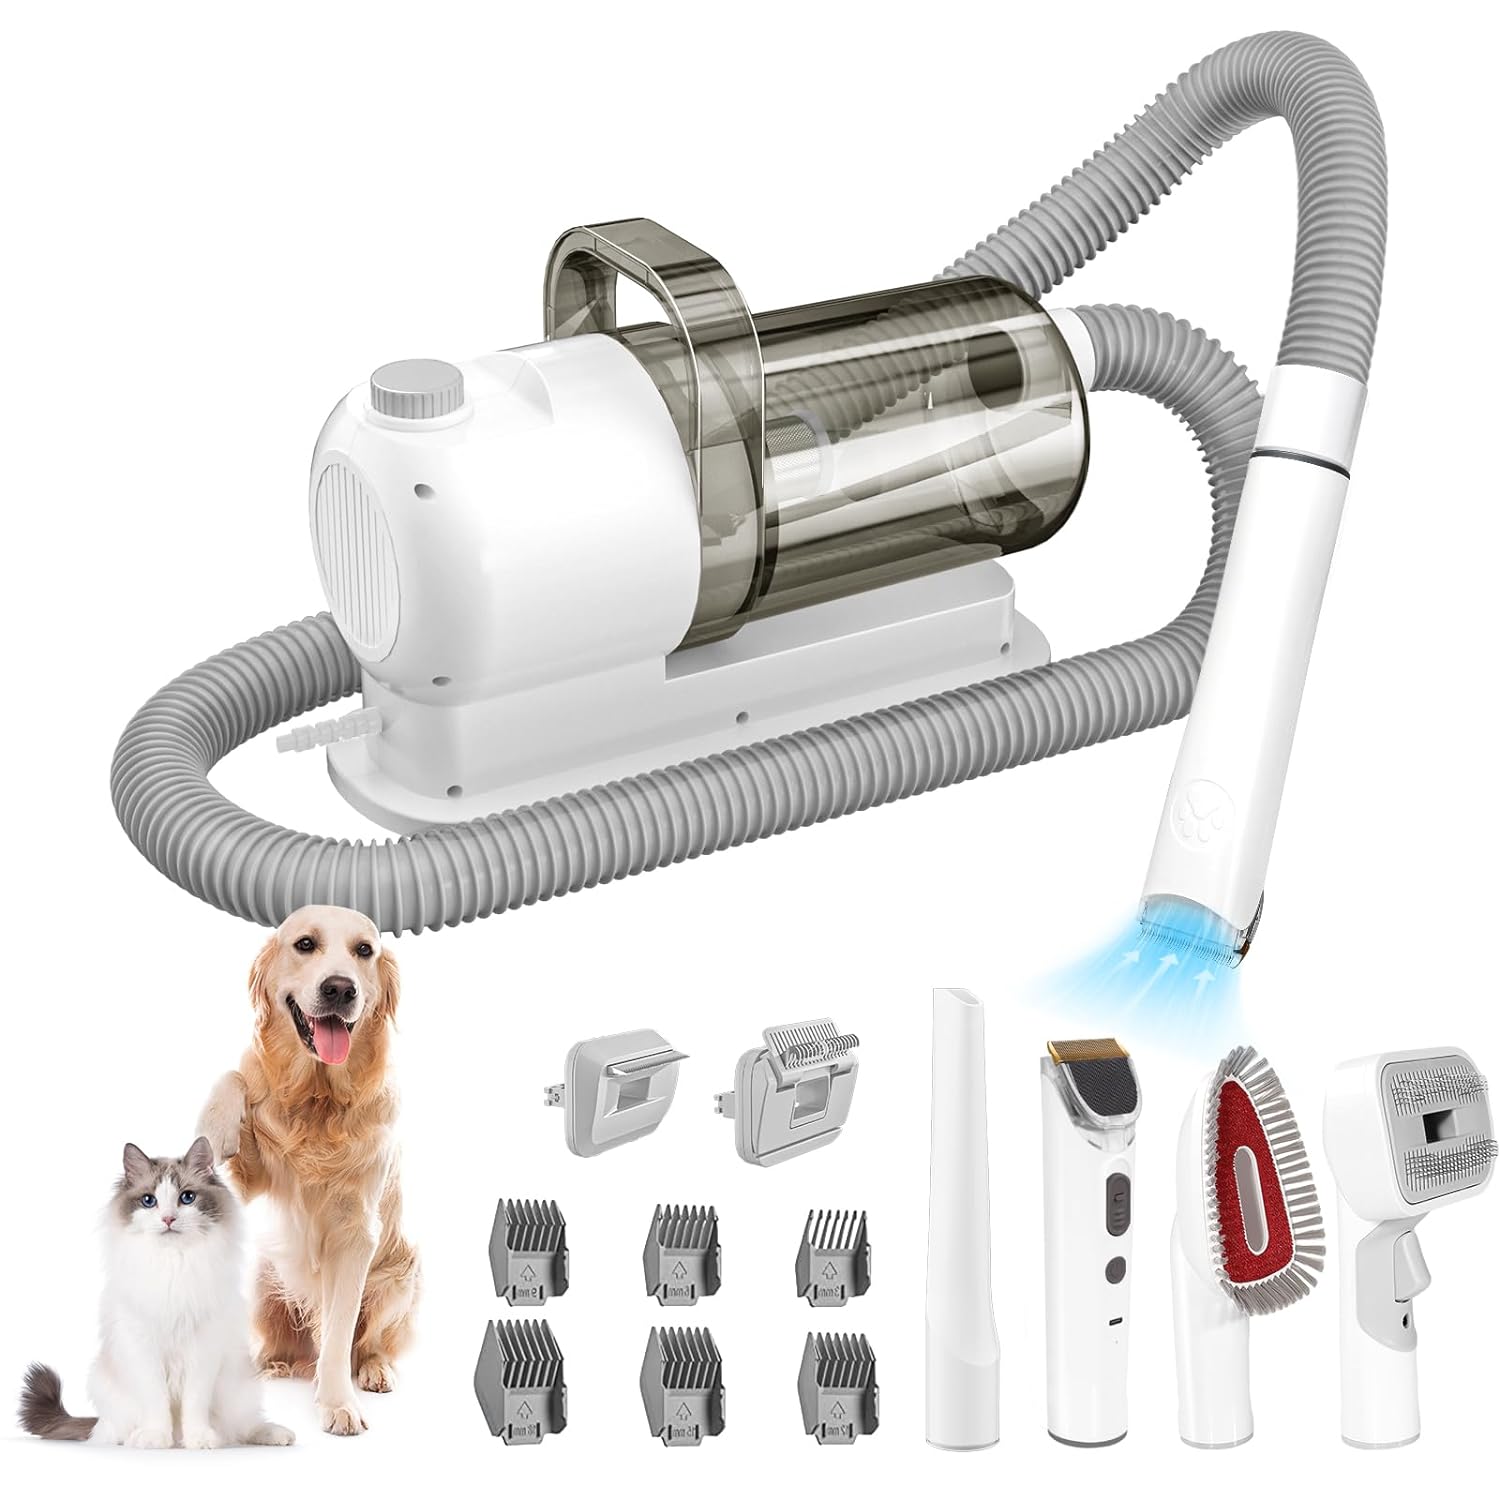 Professional Pet Cleaning Grooming Products Dog Cat Hair Vacuum Cleaner kit